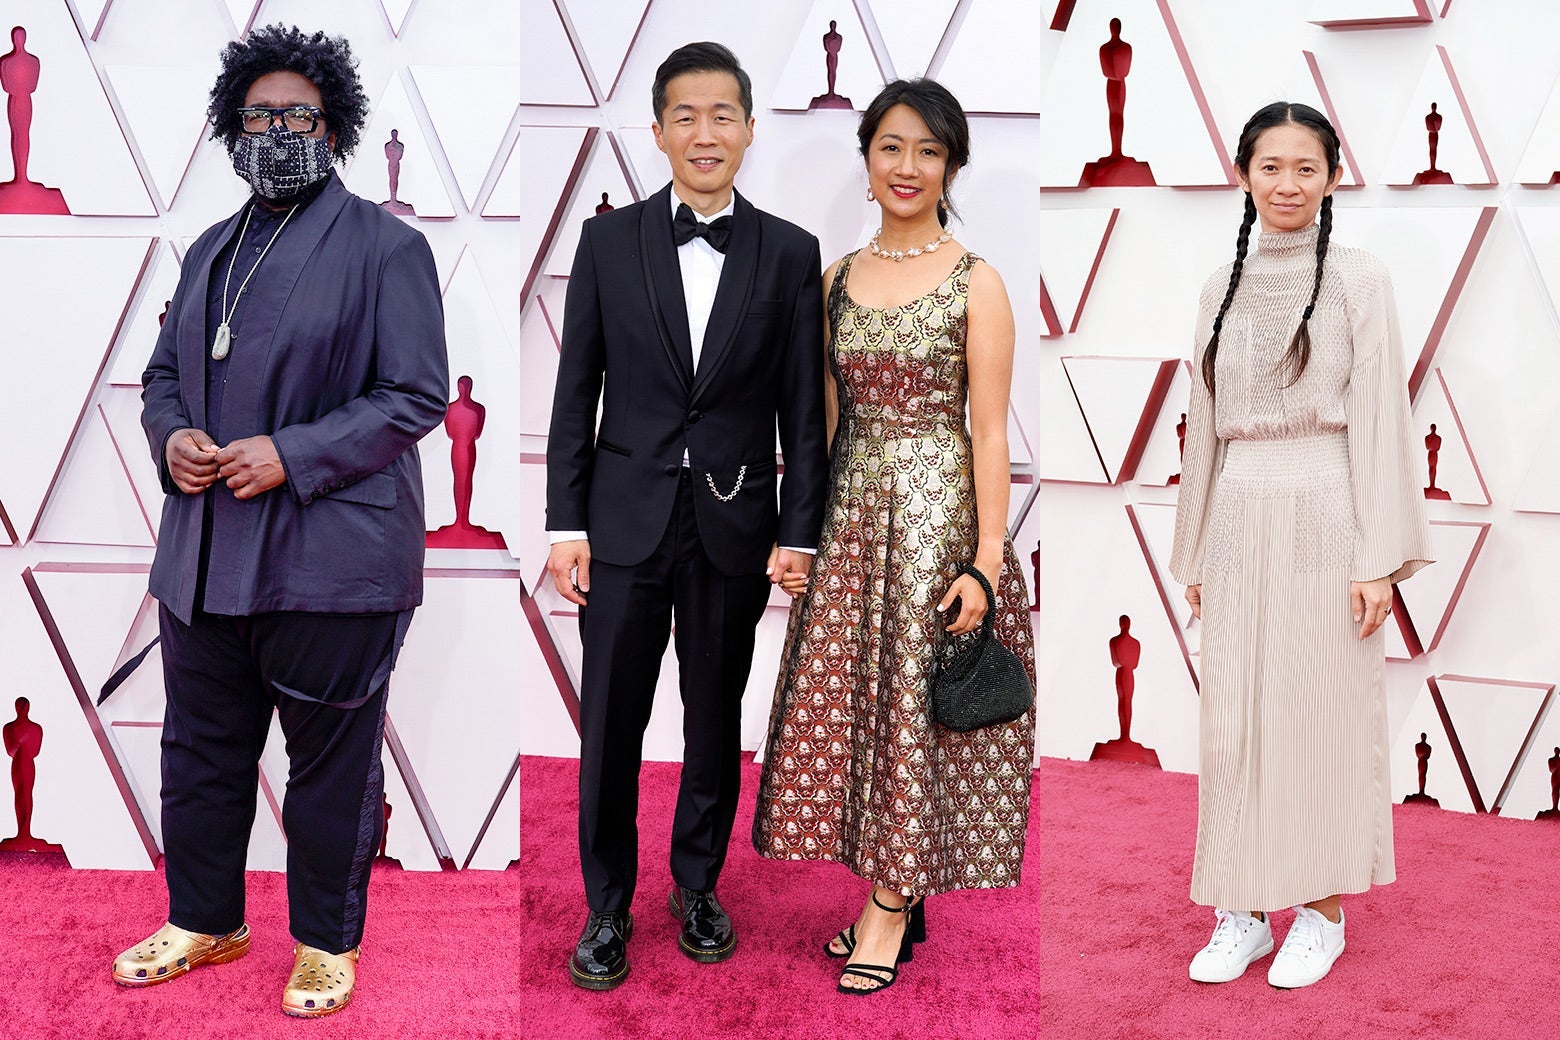 Questlove; Lee Isaac Chung and Valerie Chung; and Chloé Zhao pose on the red carpet.